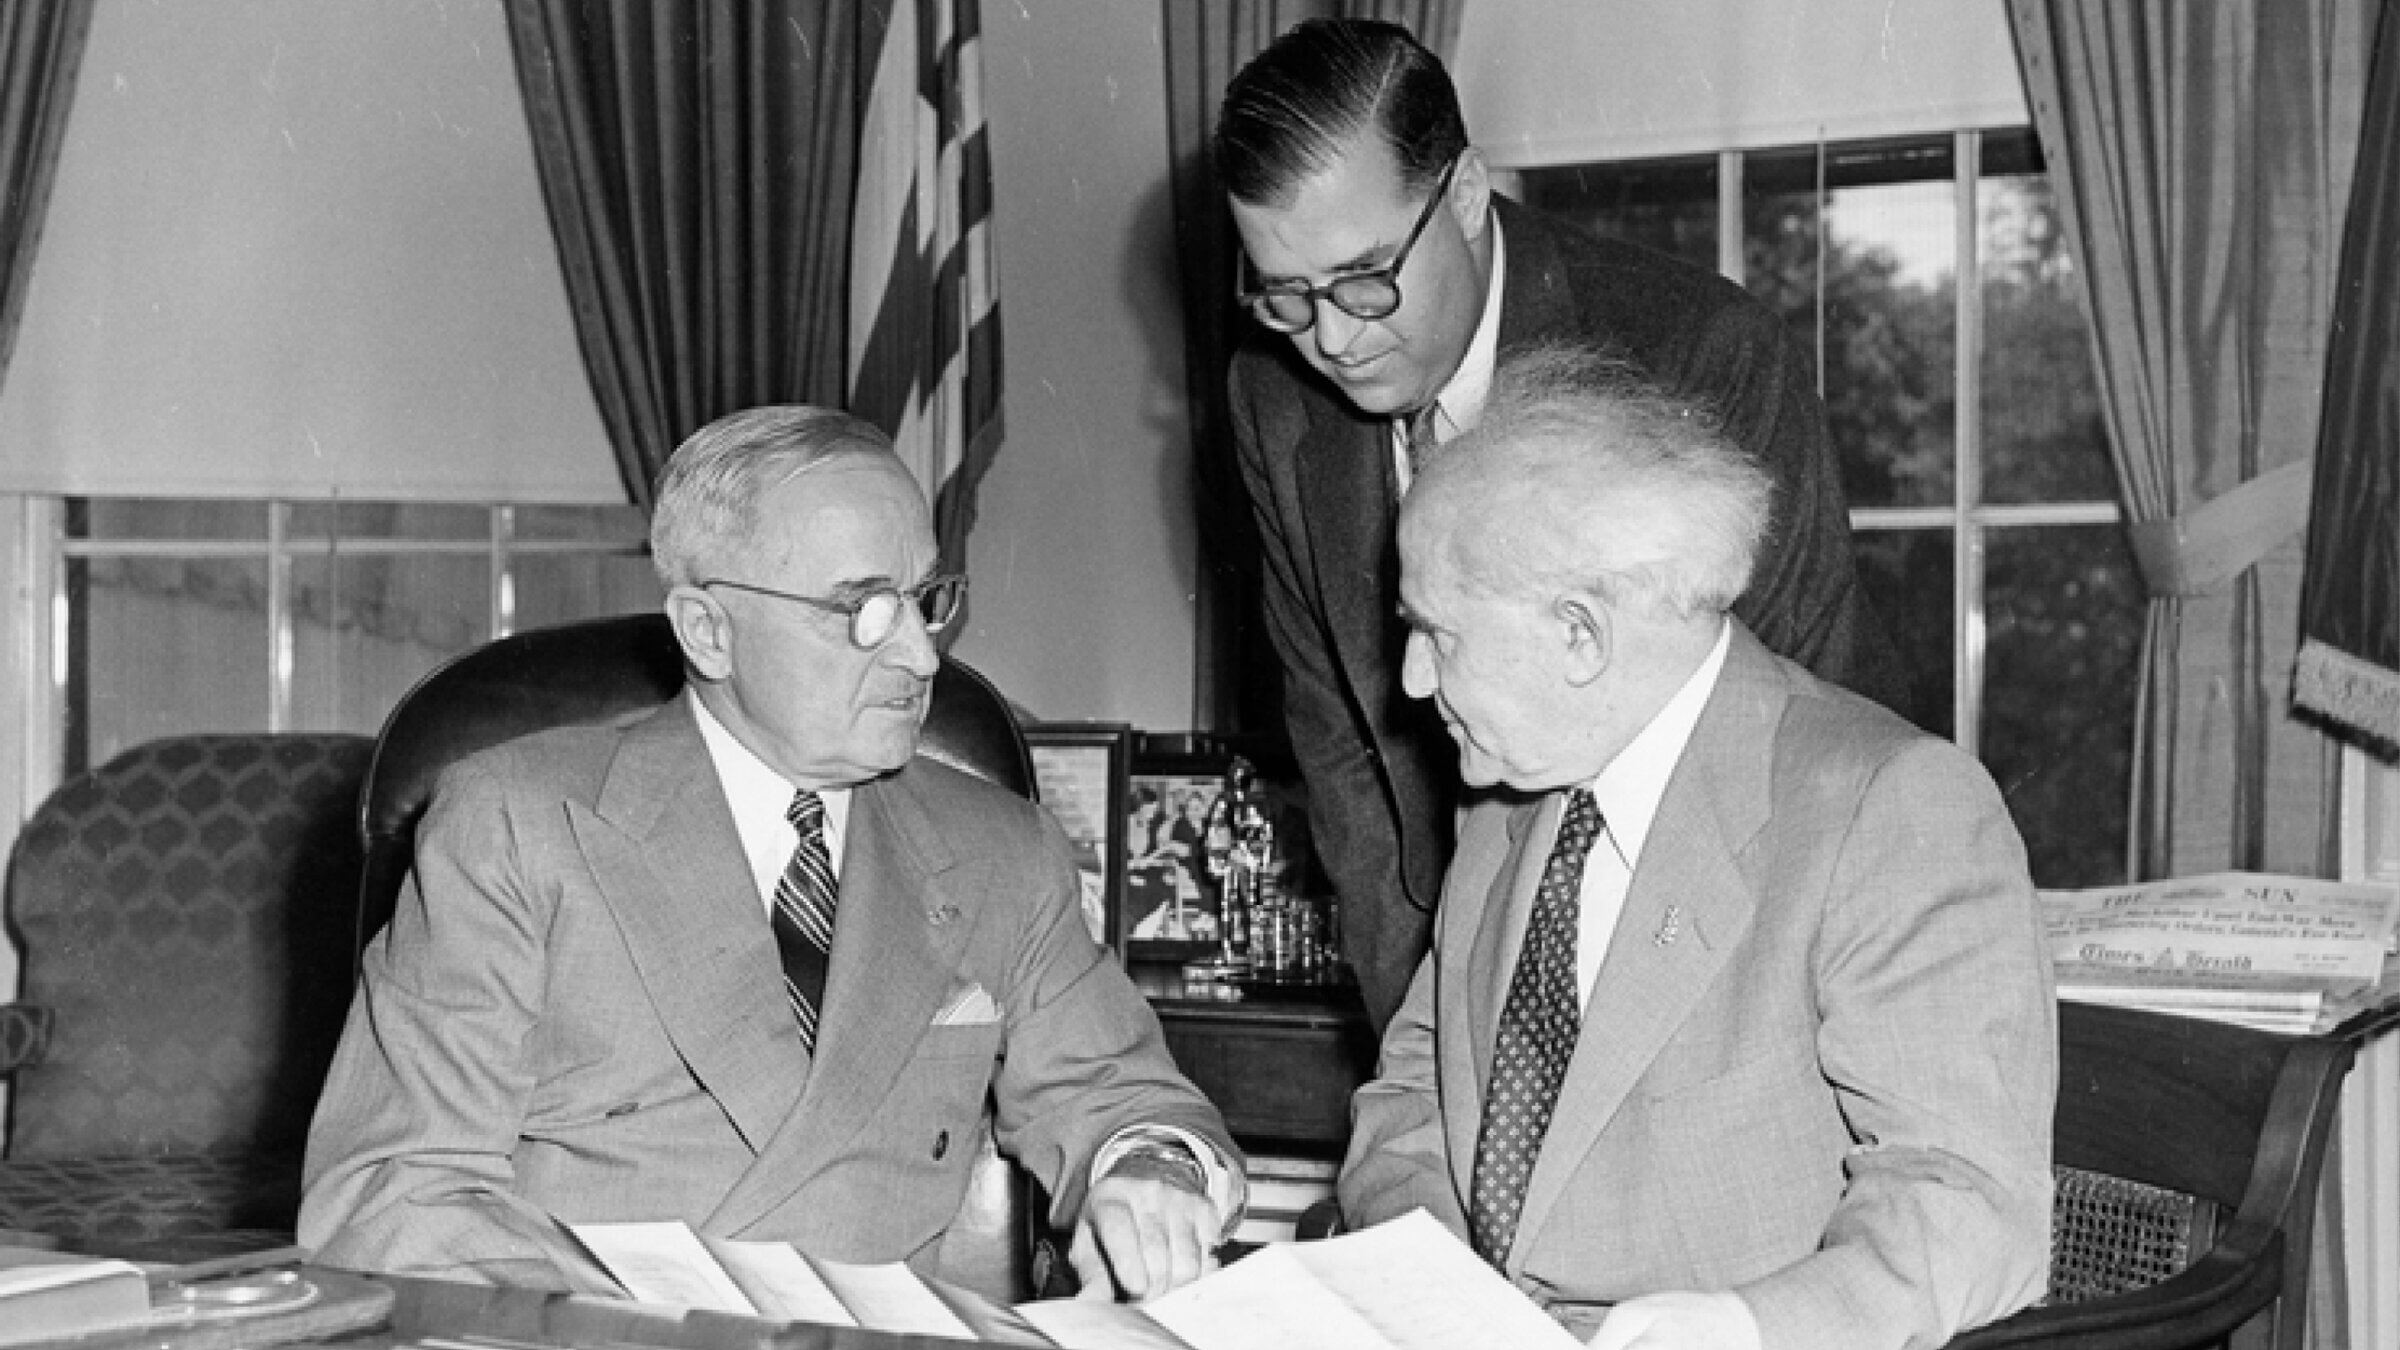 President Harry S Truman (left) meets with Israeli Prime Minister David Ben-Gurion (right) and the Ambassador of Israel to the United States, Abba Eban (standing) in a gift ceremony in the Oval Office on 
May 8, 1951. (Abbie Rowe/Harry S. Truman Library & Museum)